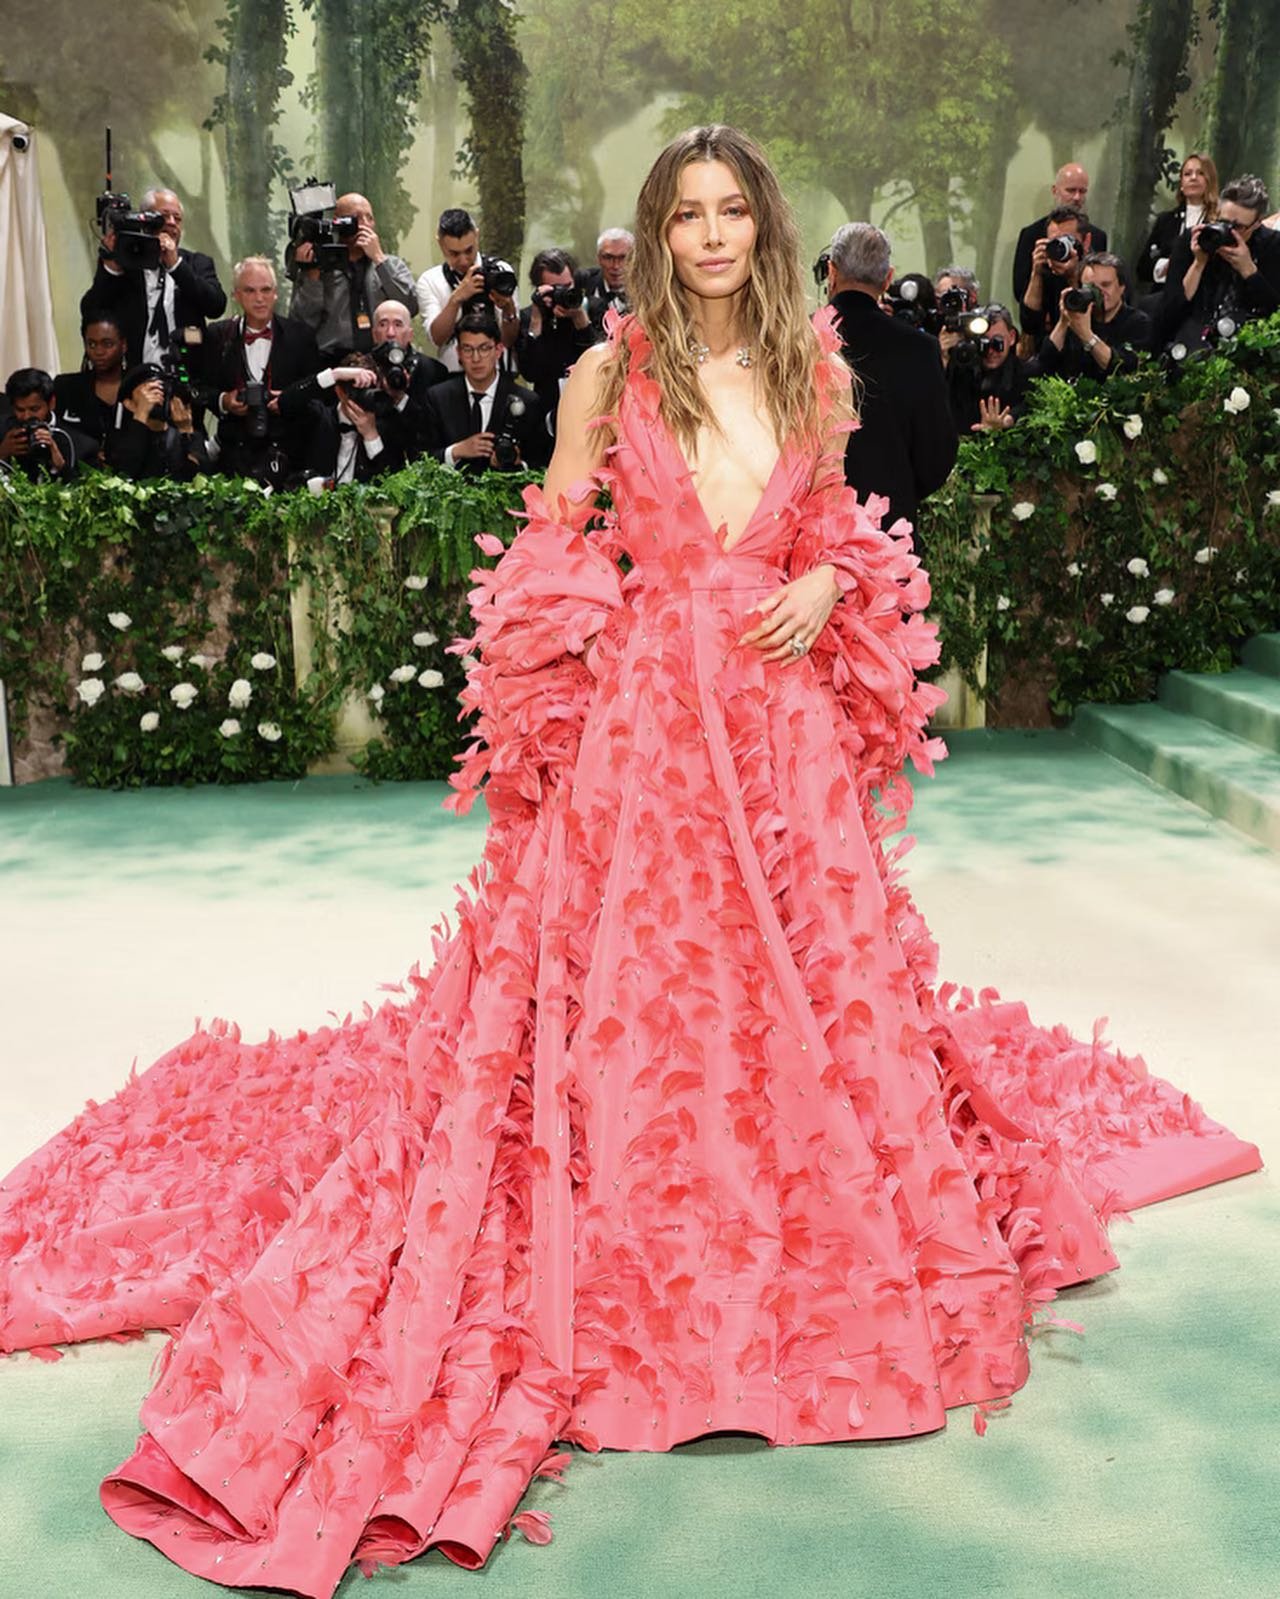 Some of my favorite pretty in pink looks from the Met Gala 🌸💕 Loved this year&rsquo;s dreamy theme 💗💗

#2024metgala 
#2024metgalameme 
#acupuncture 
#scottsdaleacupuncture 
#justforfun
#servinglooks 
#sartorial 
#pinkfashion
#allthepink
#makeitpi